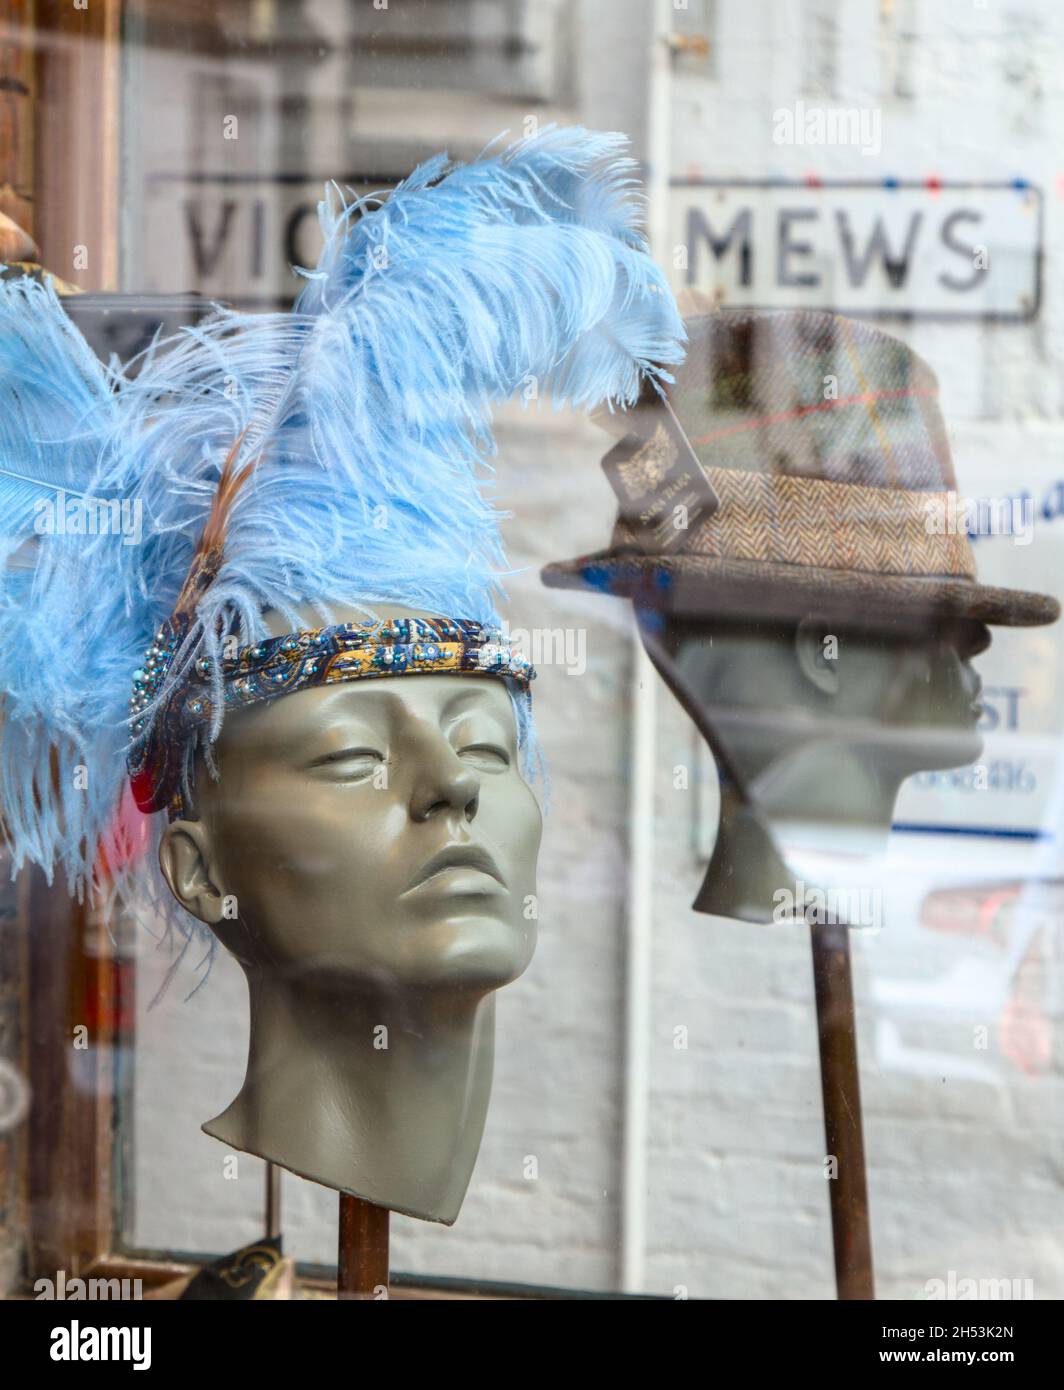 Blue Feather Headress And Tweed Trilby On Mannequin Heads In The Window Of A Milliner's Shop, Lymington UK Stock Photo